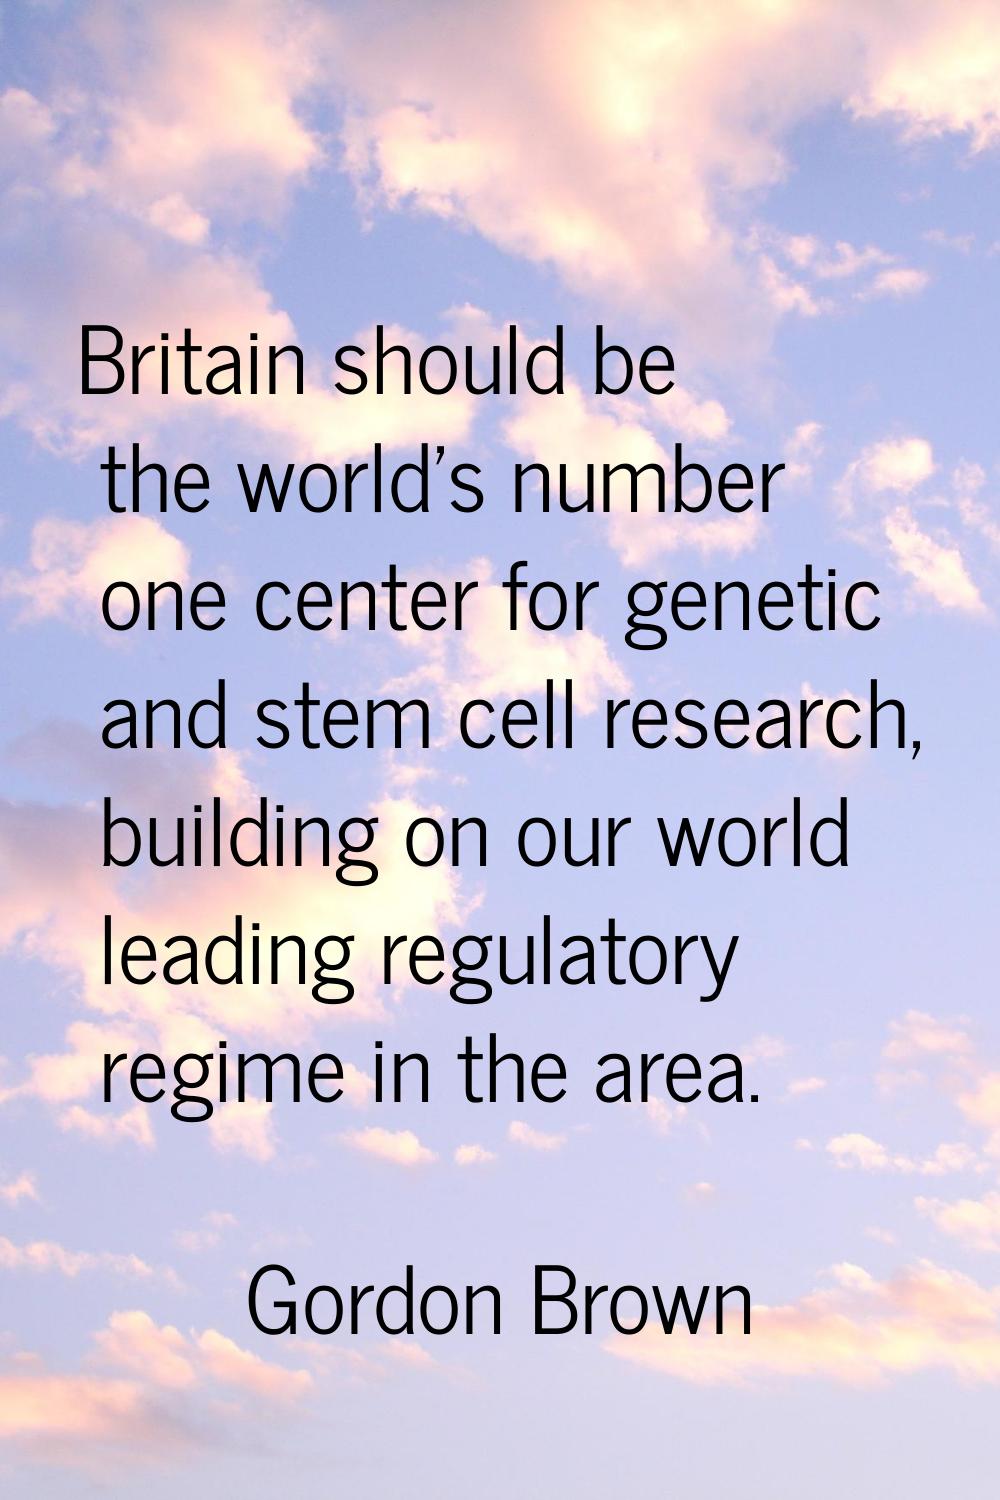 Britain should be the world's number one center for genetic and stem cell research, building on our